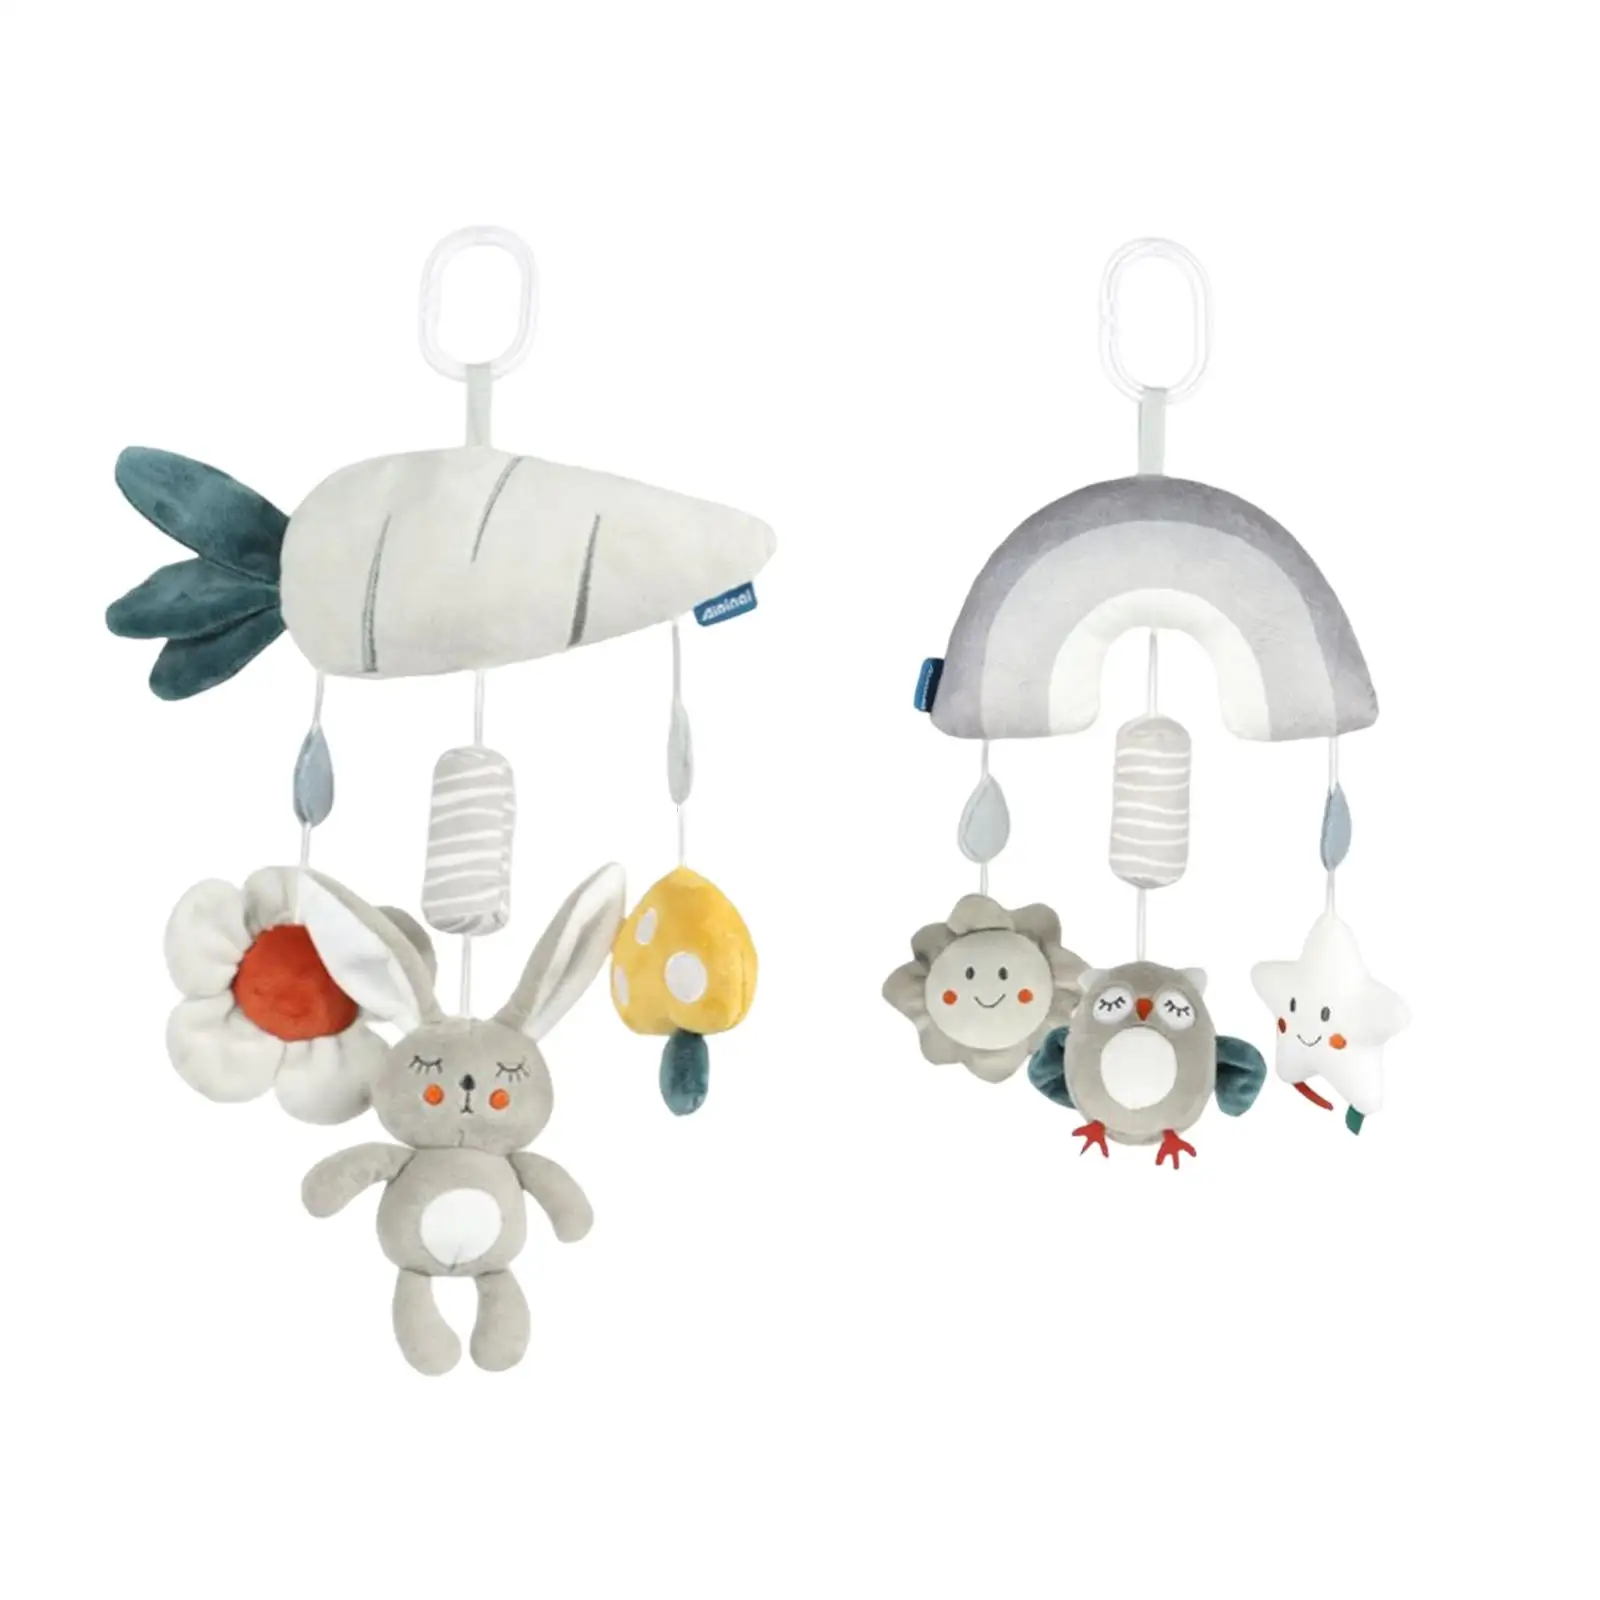 Baby Crib Mobile Wind Chime Early Development for Children Infant